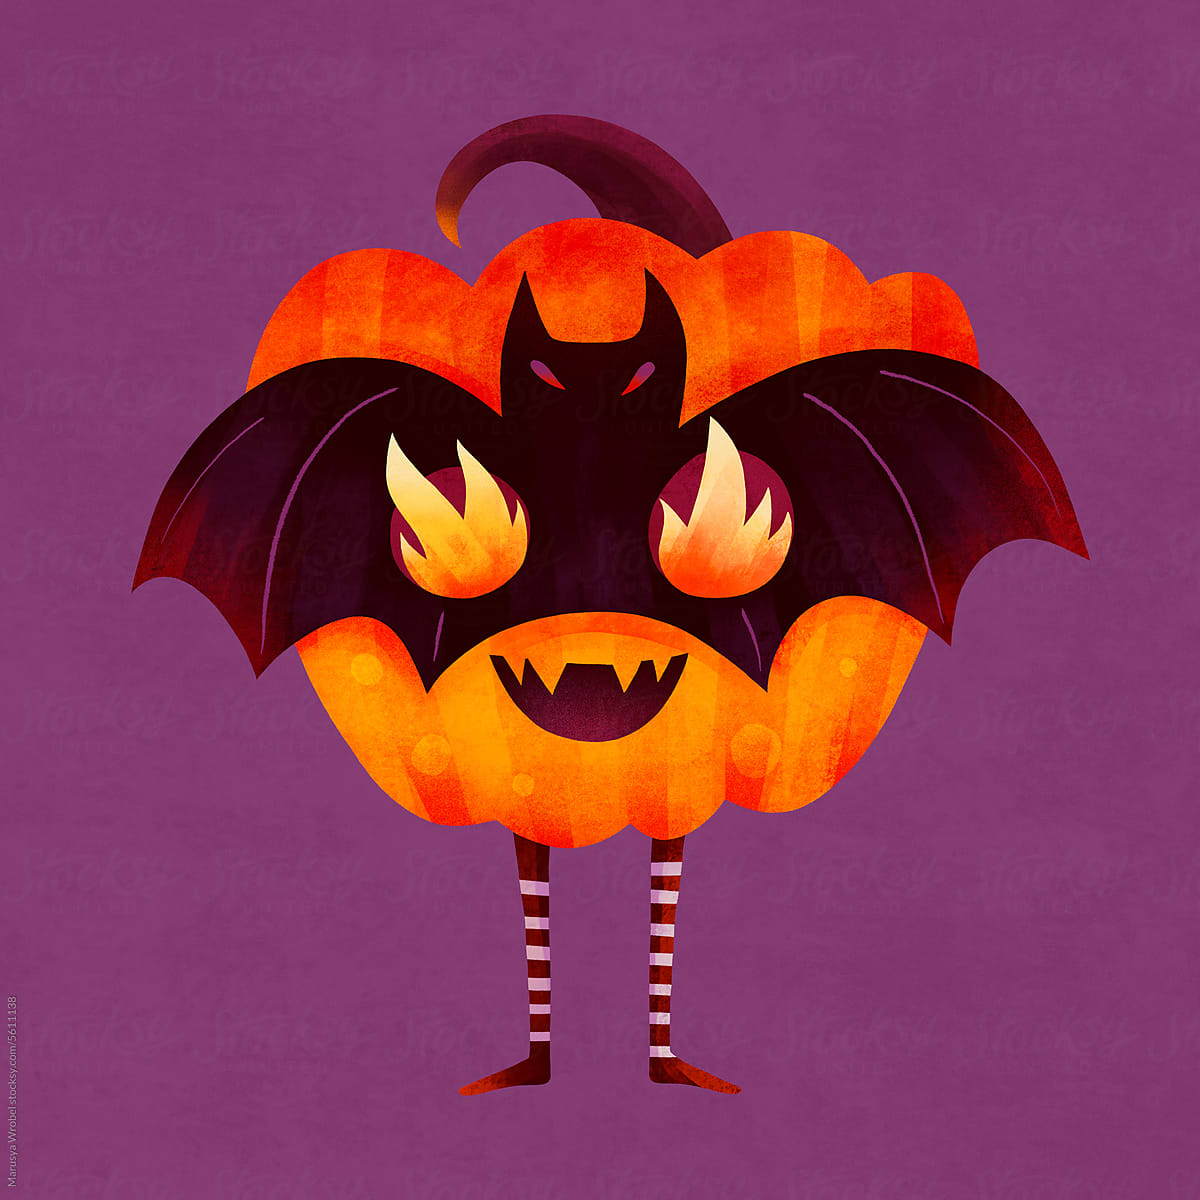 Halloween pumpkin character dressed in a bat costume with fire i